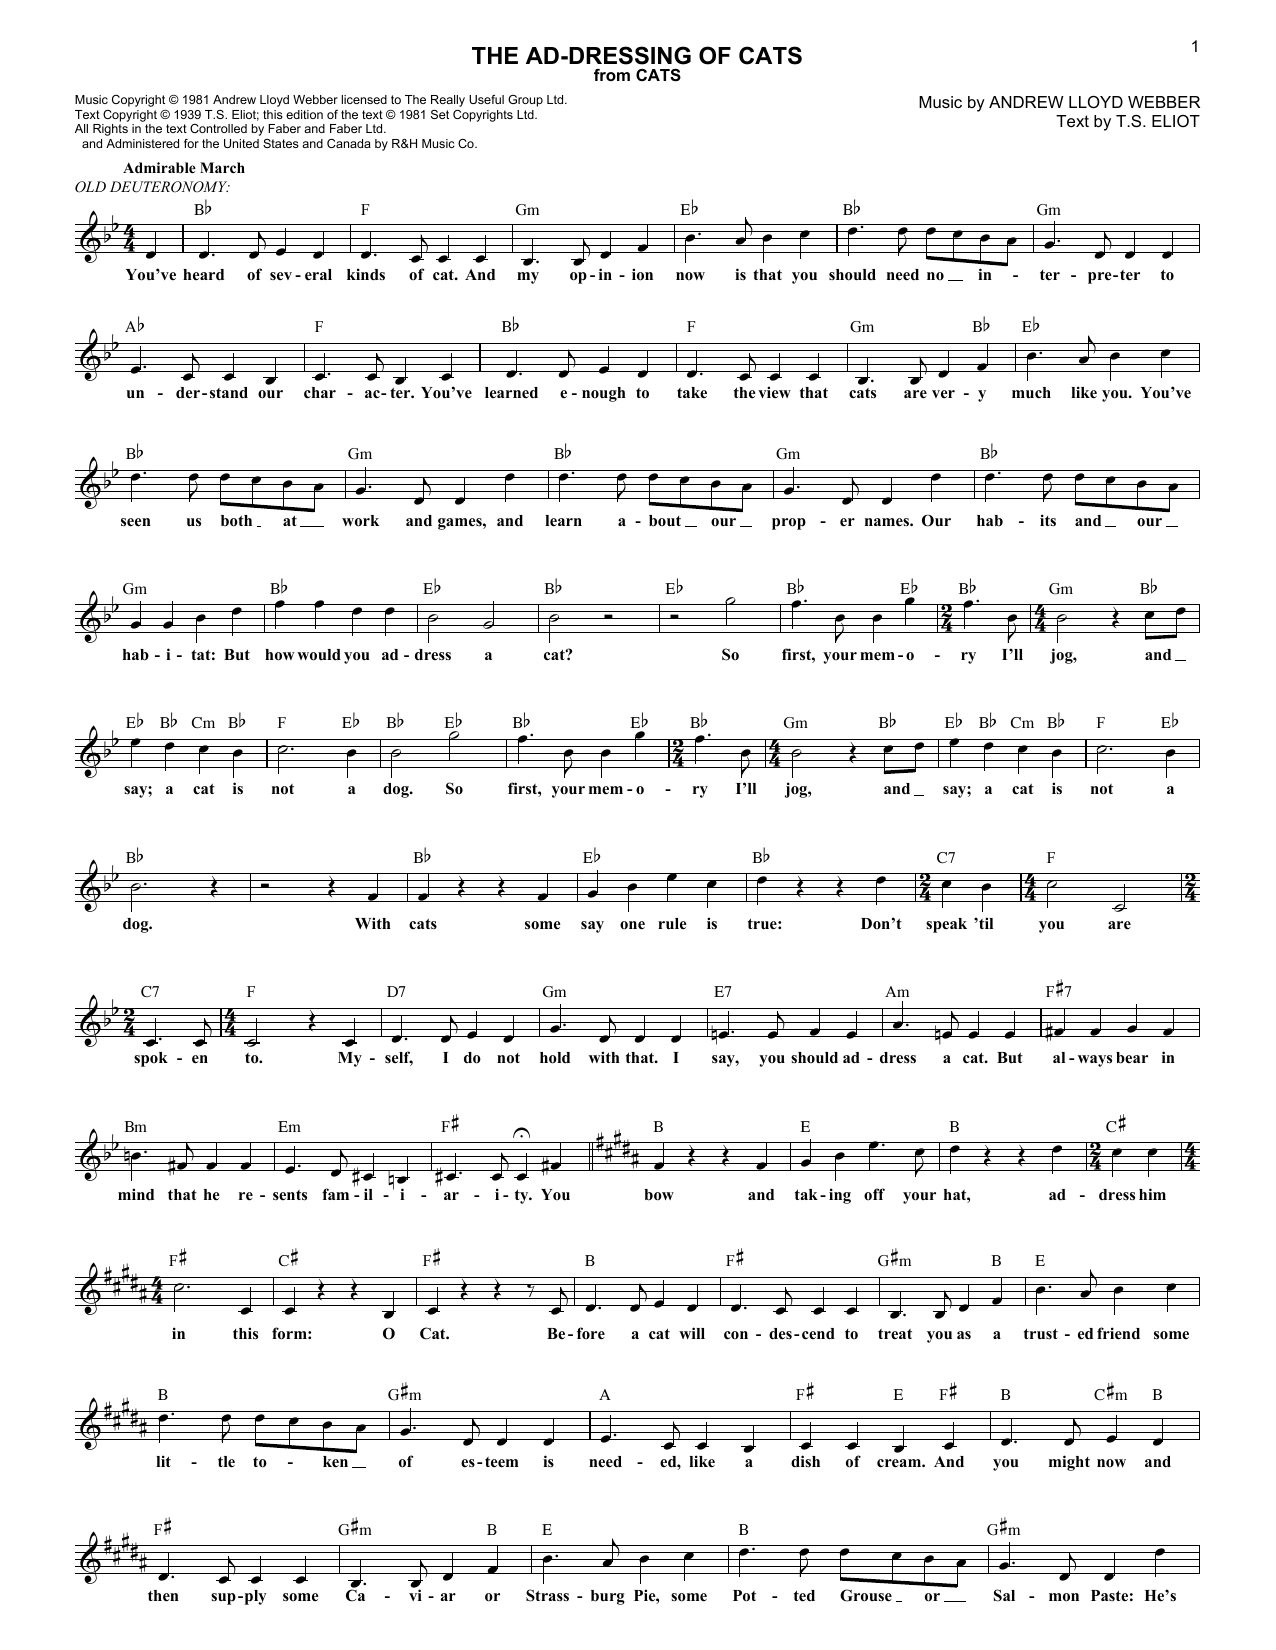 Download Andrew Lloyd Webber The Ad-Dressing Of Cats (from Cats) Sheet Music